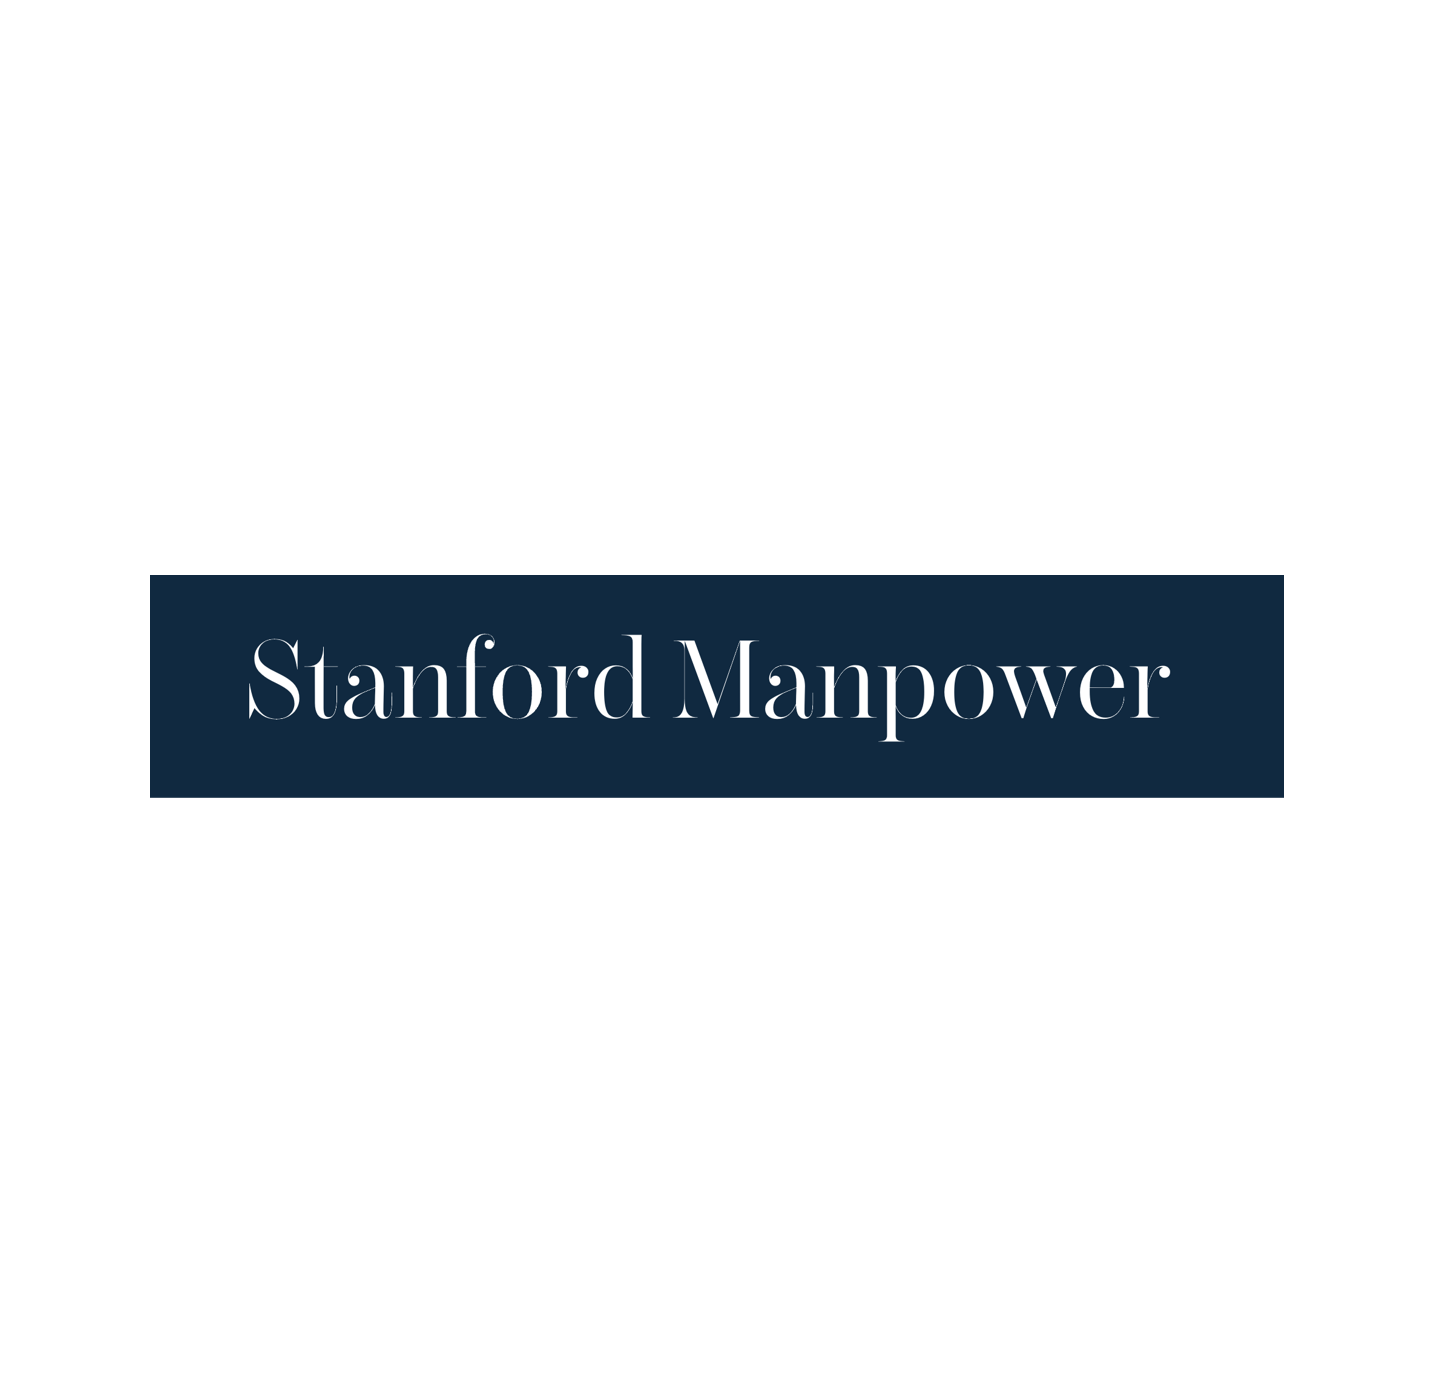 Company logo for Stanford Manpower